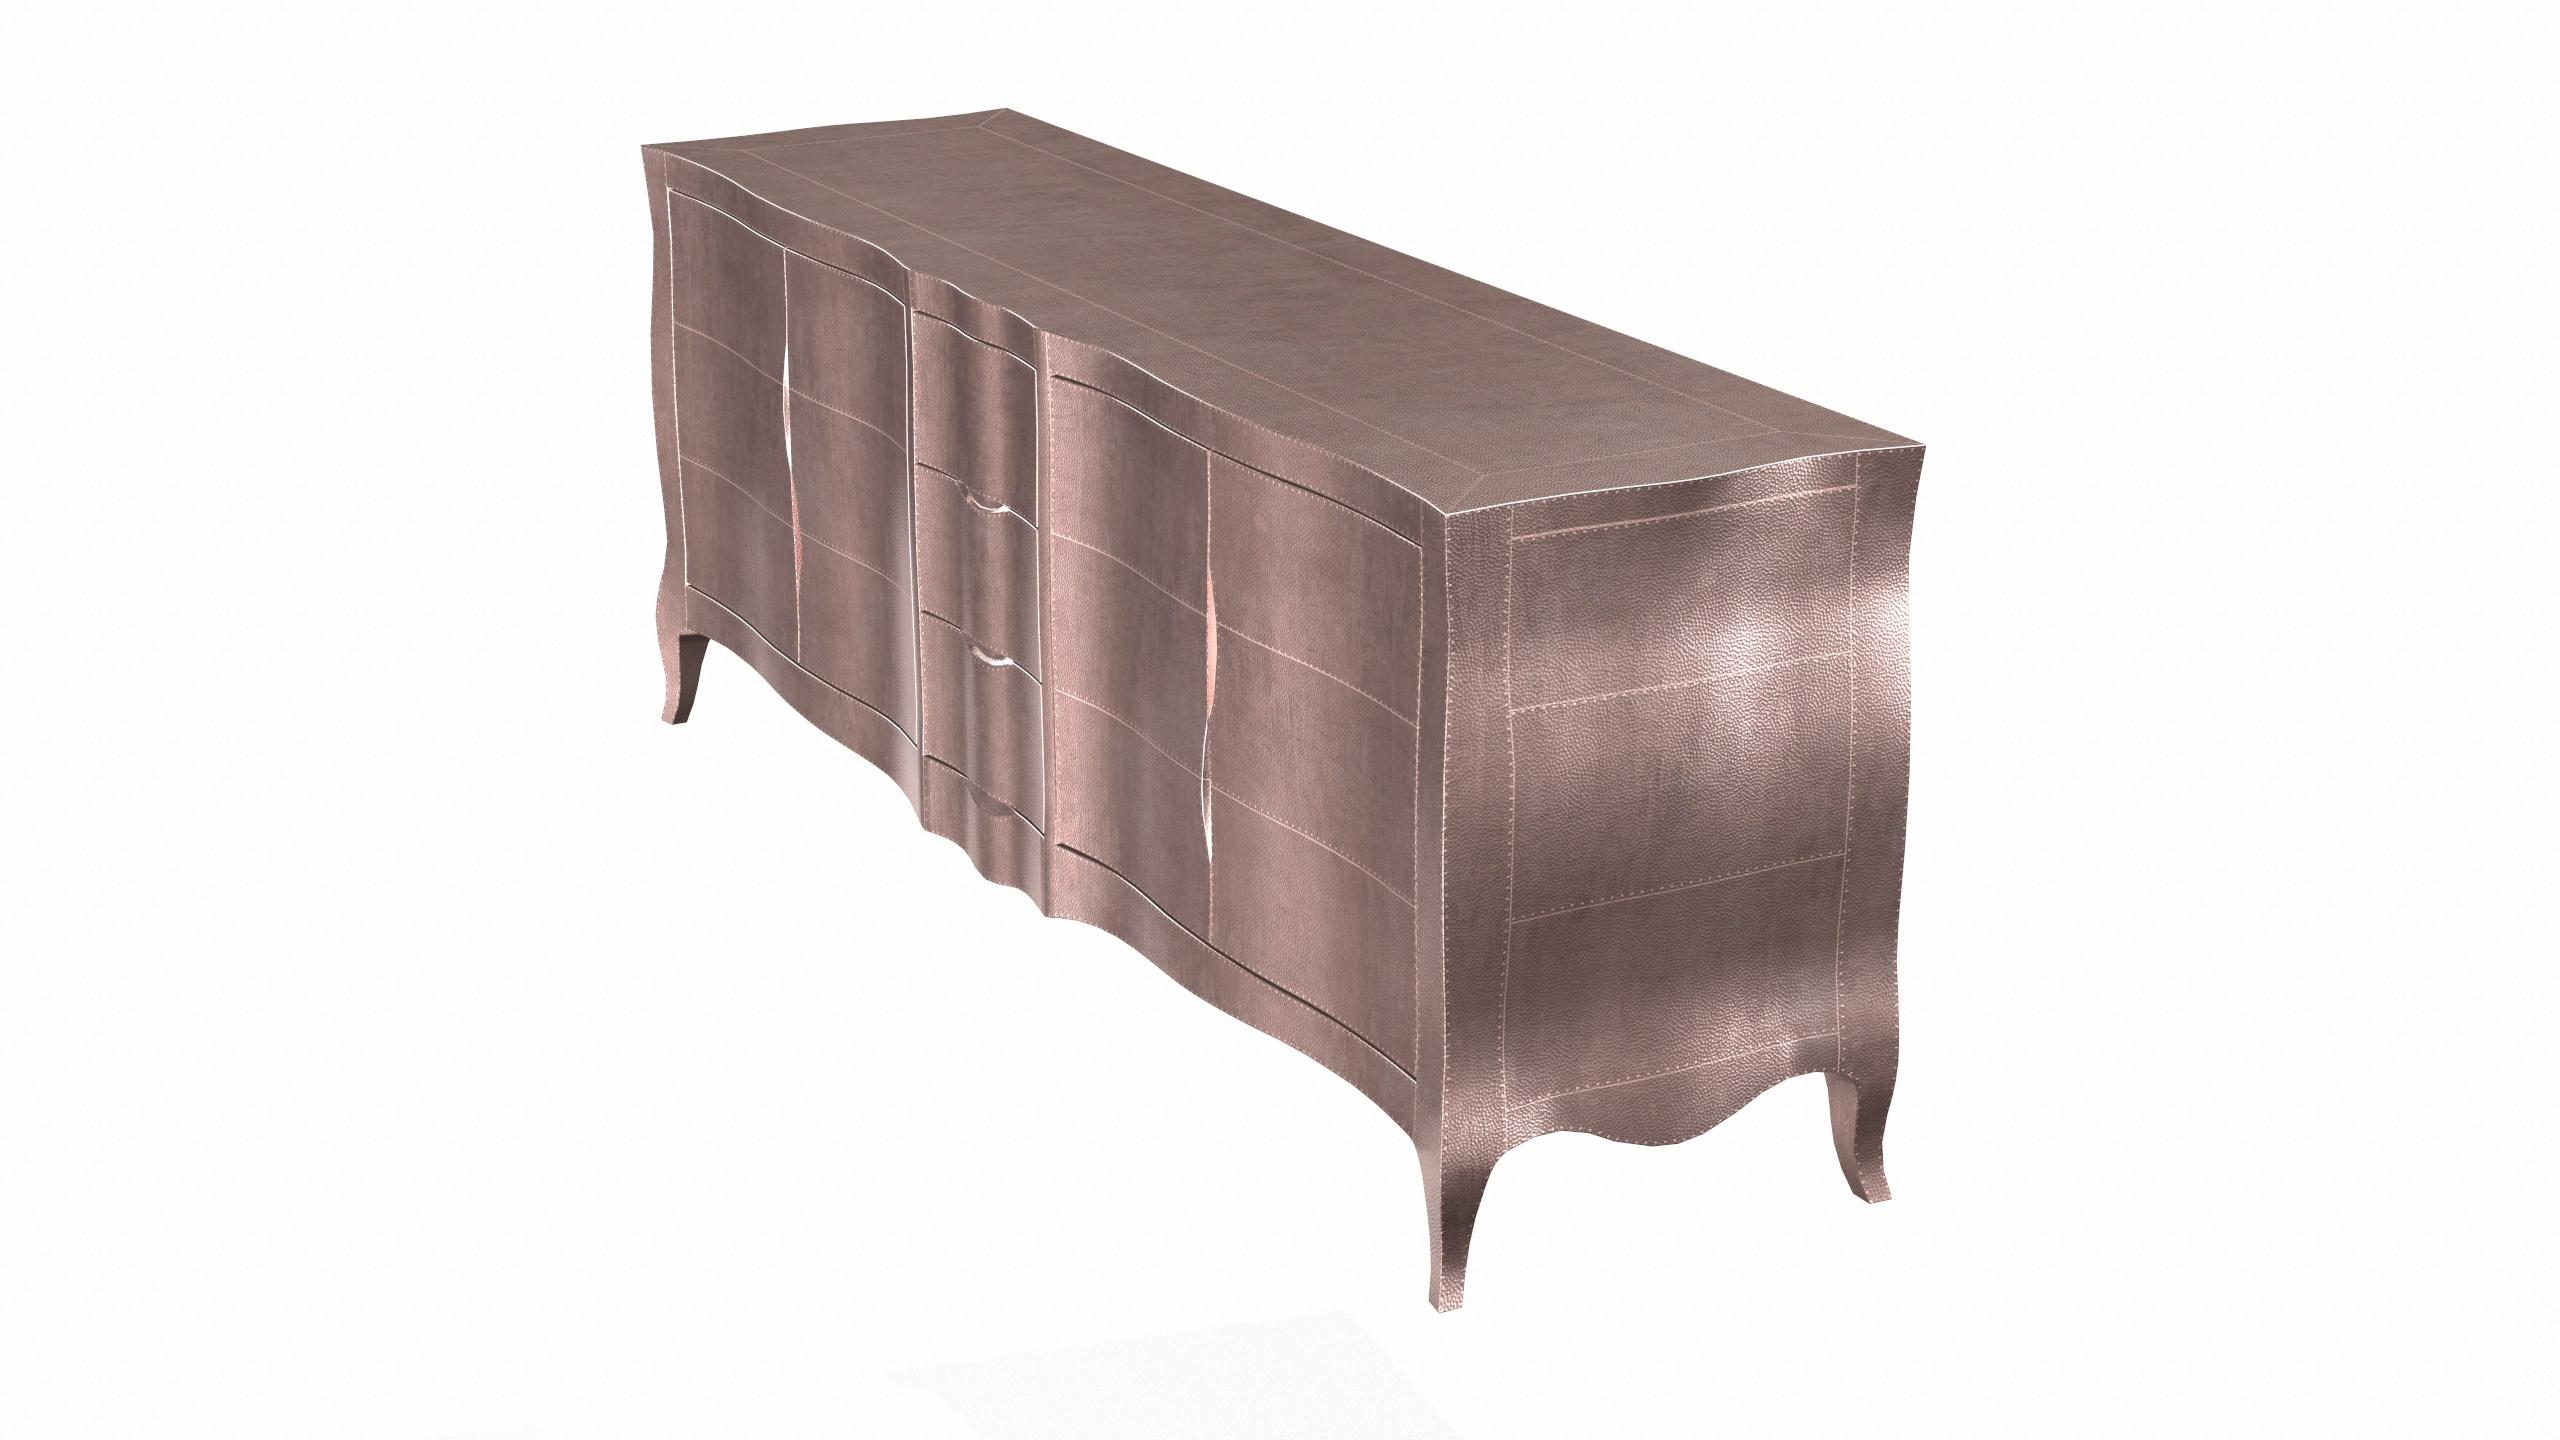 Hand-Carved Louise Credenza Art Deco Cabinets in Mid. Hammered Copper by Paul Mathieu For Sale